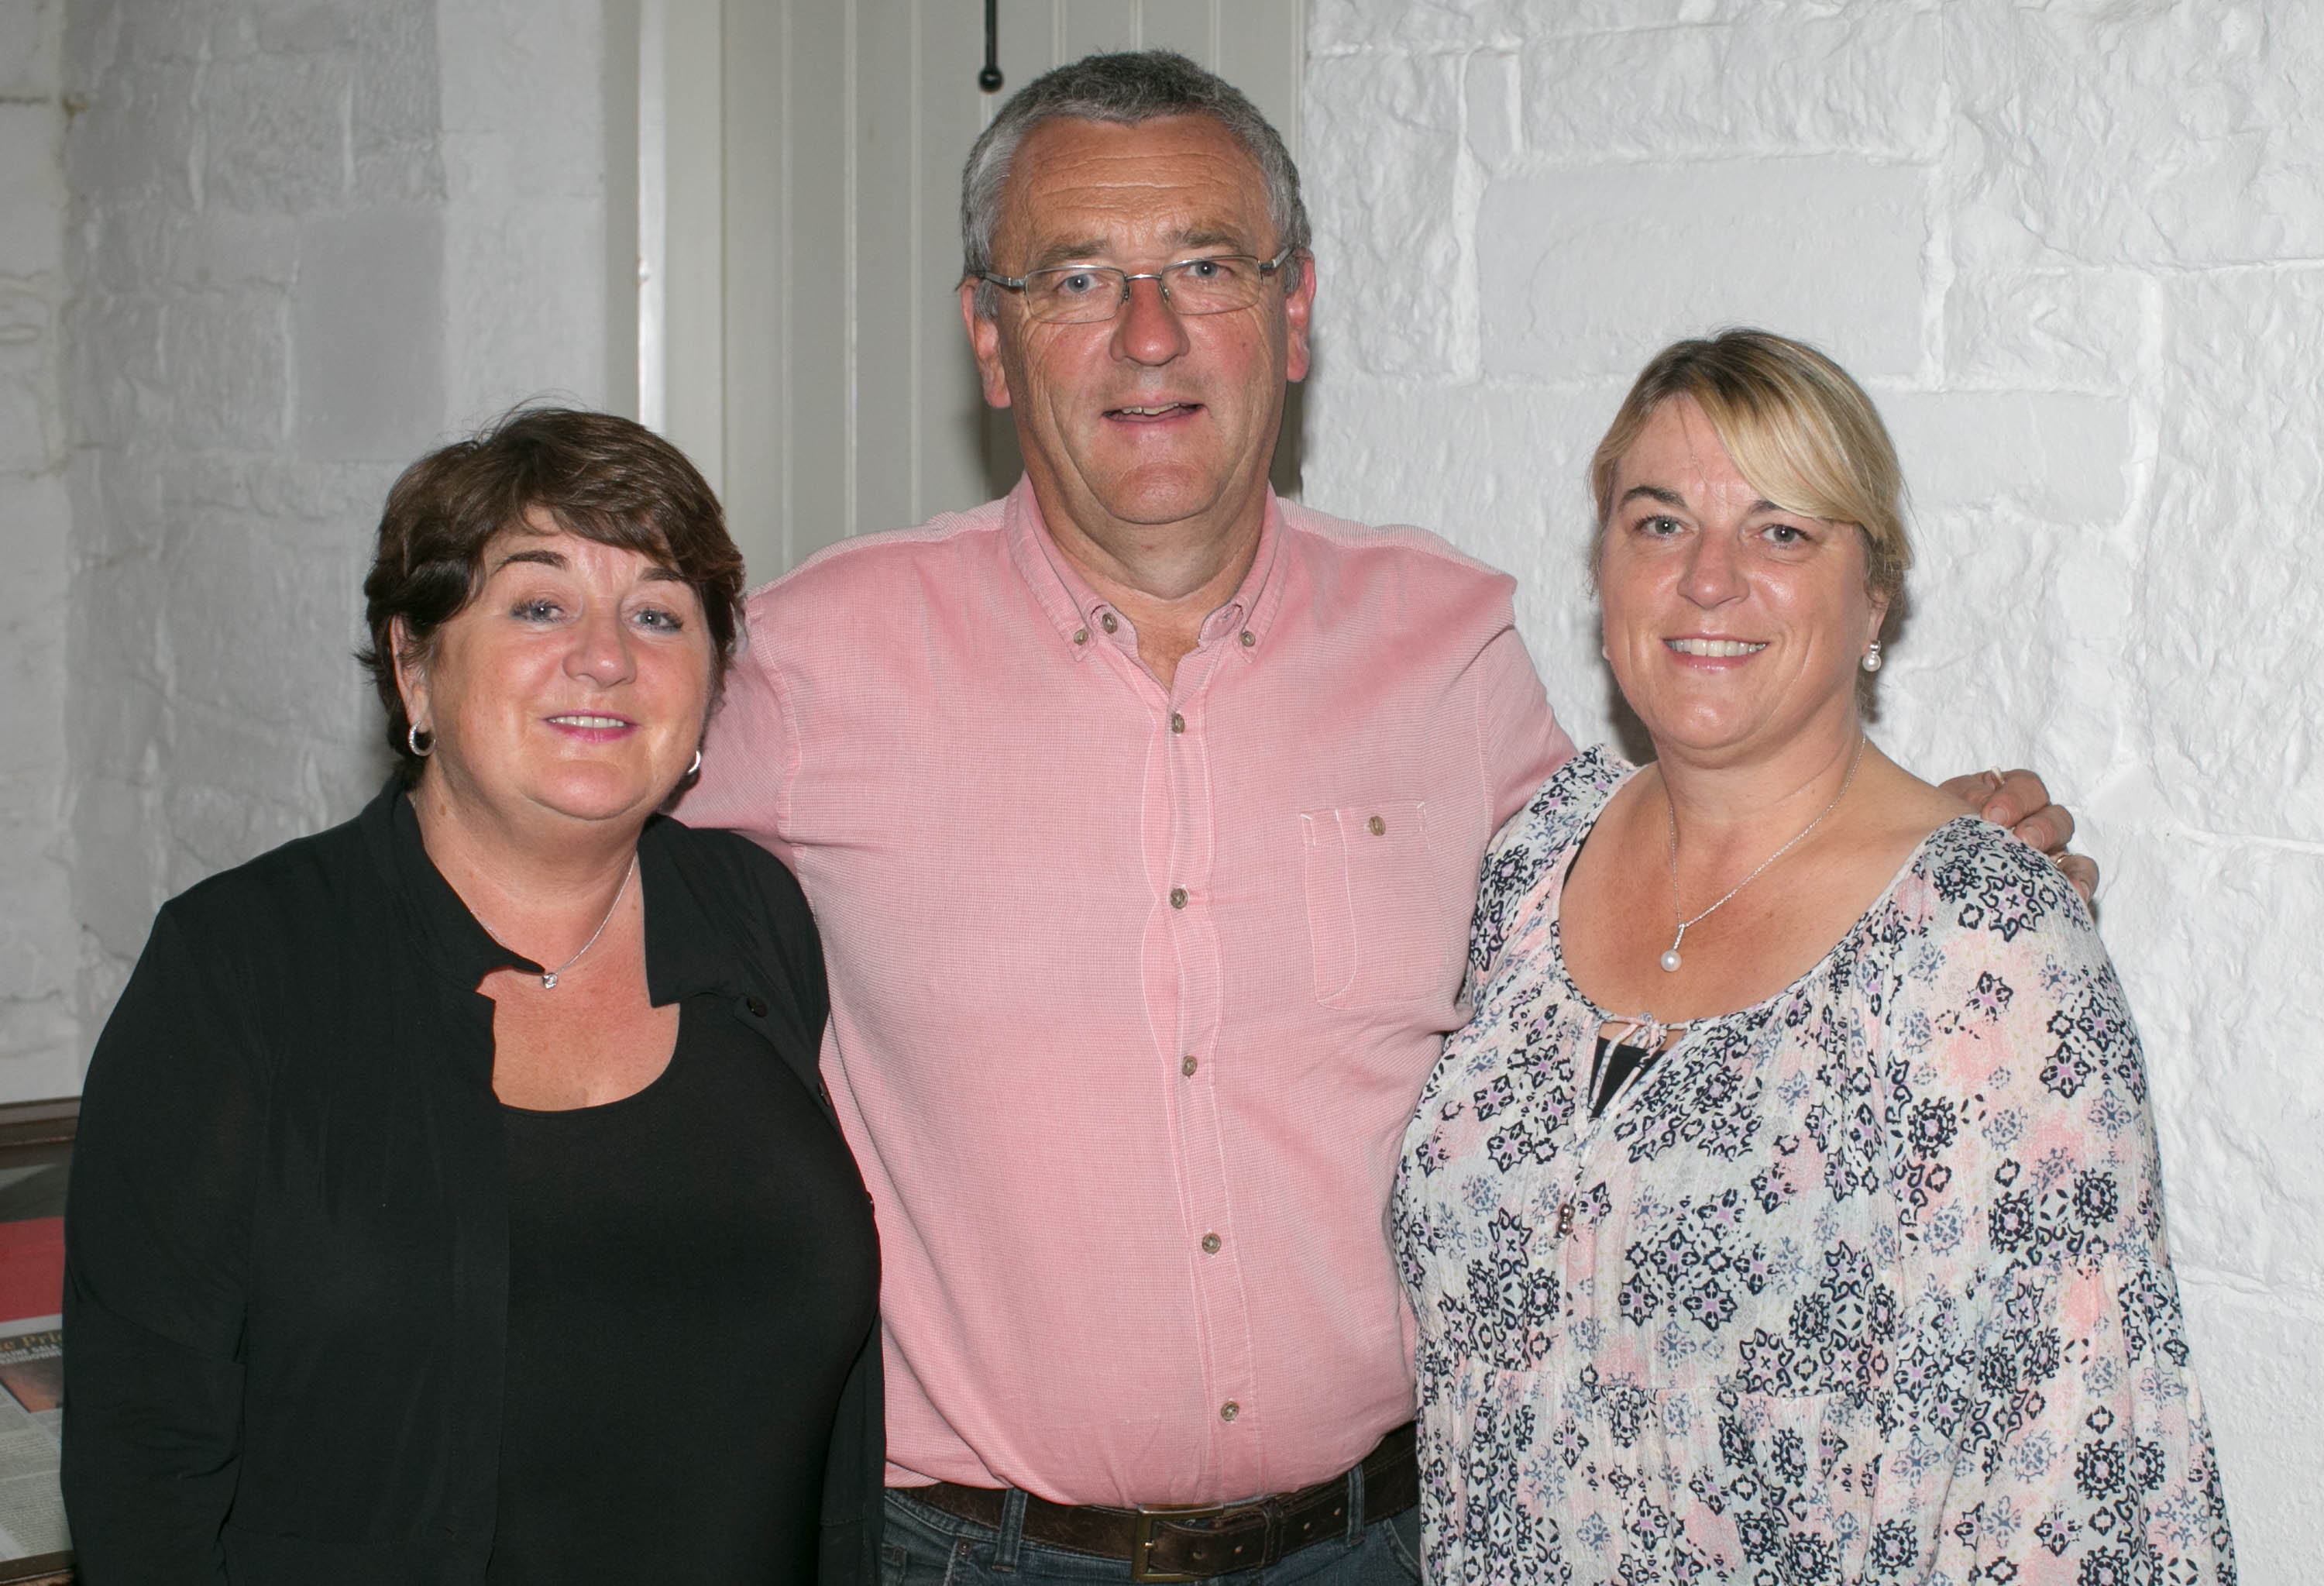 Margaret Creagh-Nelson with Sean and Anne Conroy at Donaghmore Workhouse for the John Spillane & Jimmy Crowley concert presented in association with Legends Vintage Cycling Club as part of Heritage week.